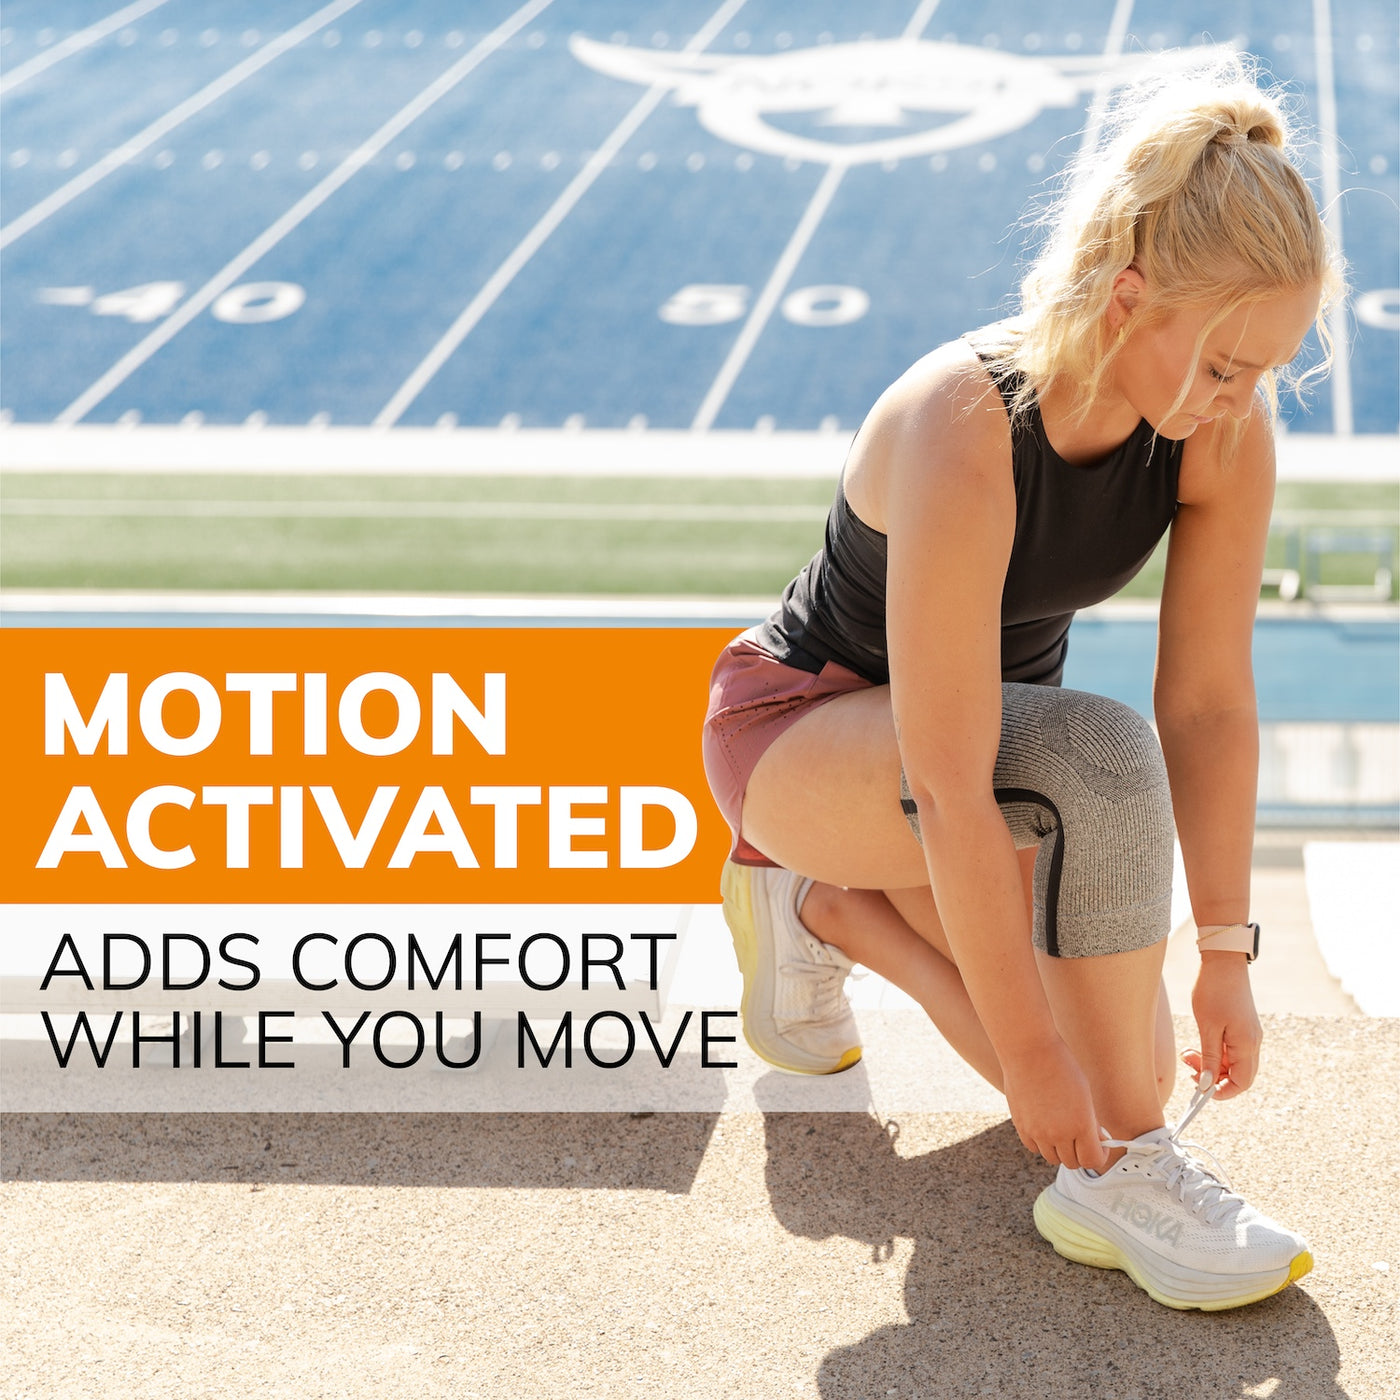 The cooling compression knee brace is motion activated so you experience comfort while you move